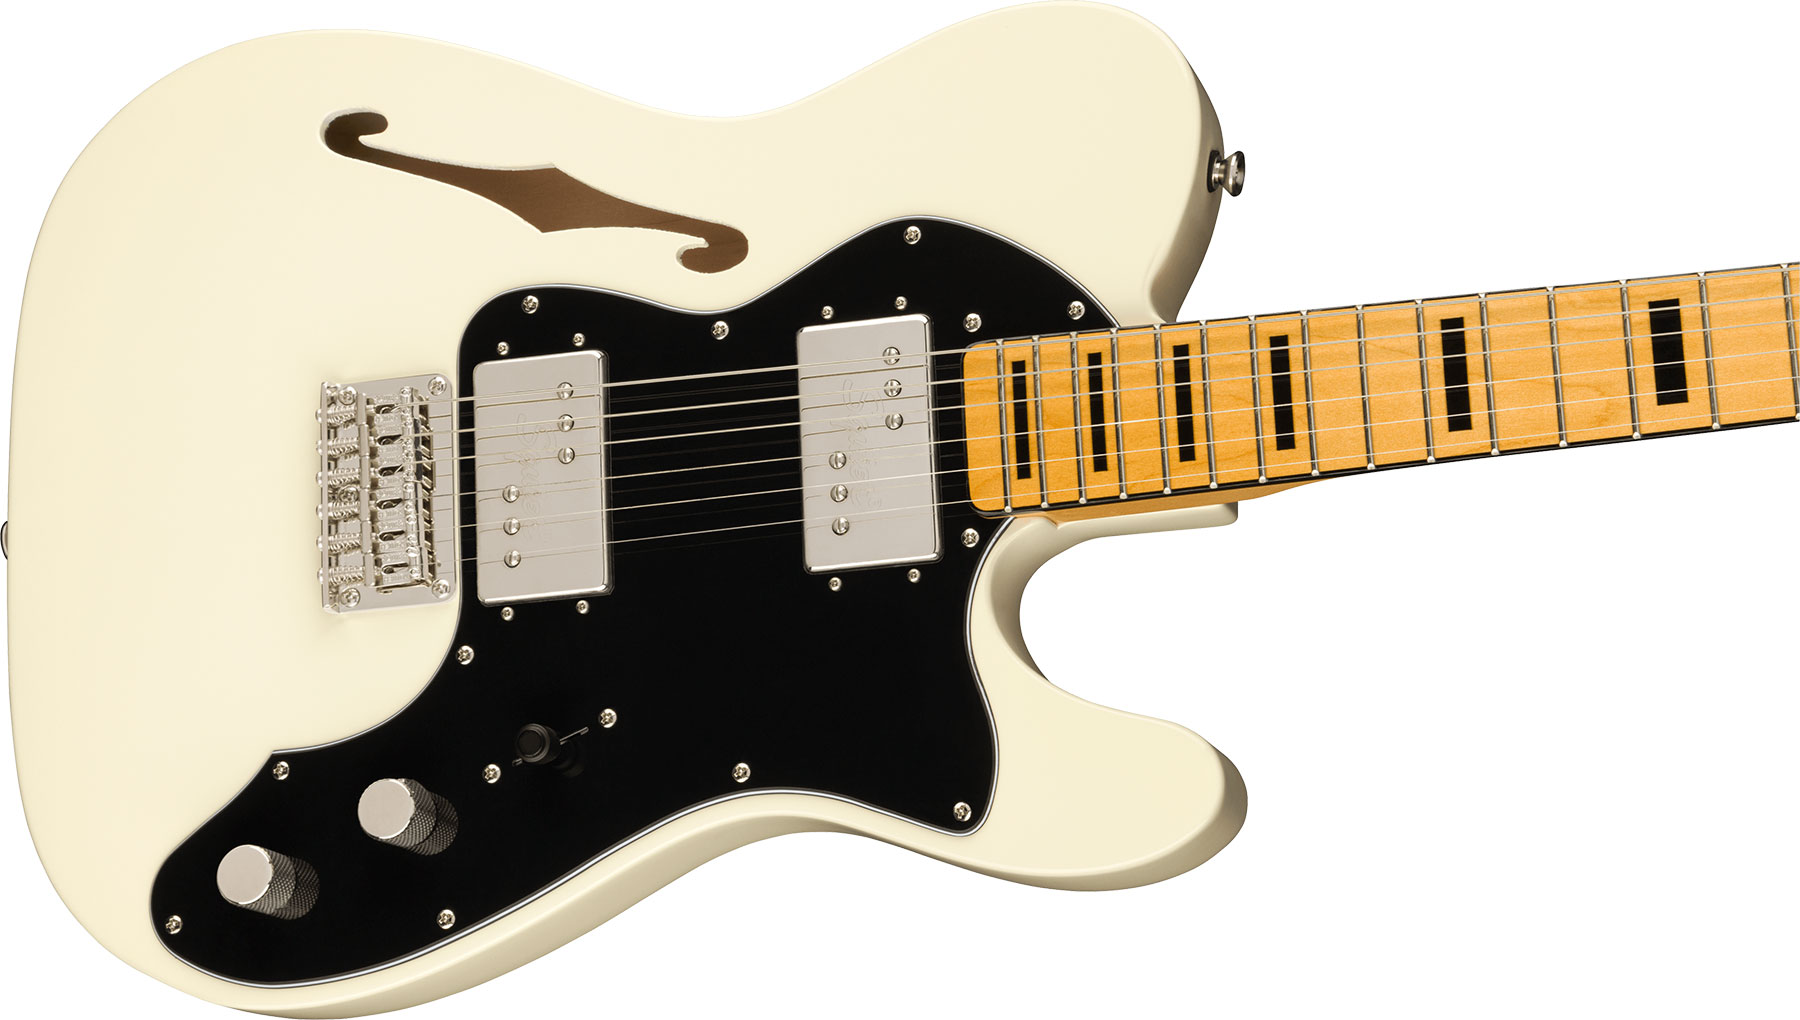 Squier Tele Thinline '70s Classic Vibe Fsr Ltd Hh Mn - Olympic White - Tel shape electric guitar - Variation 2